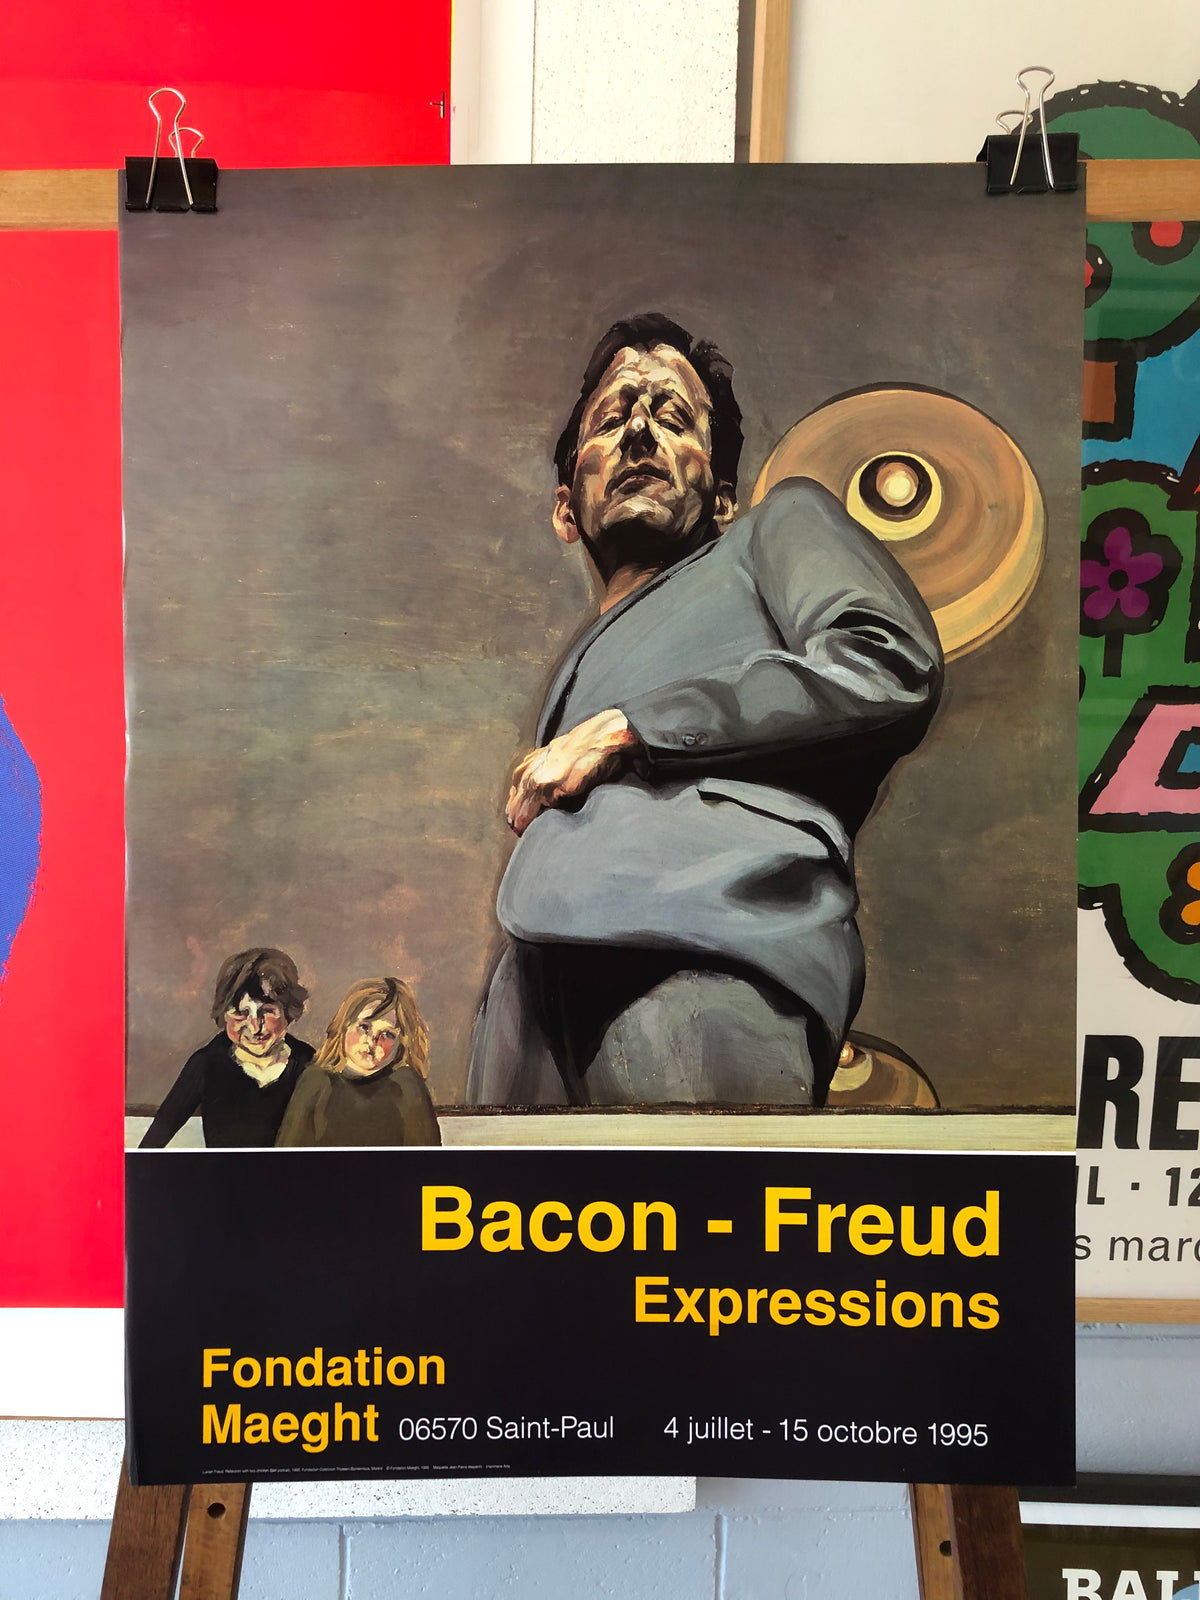 'Bacon + Freud Expressions' Exhibition Poster